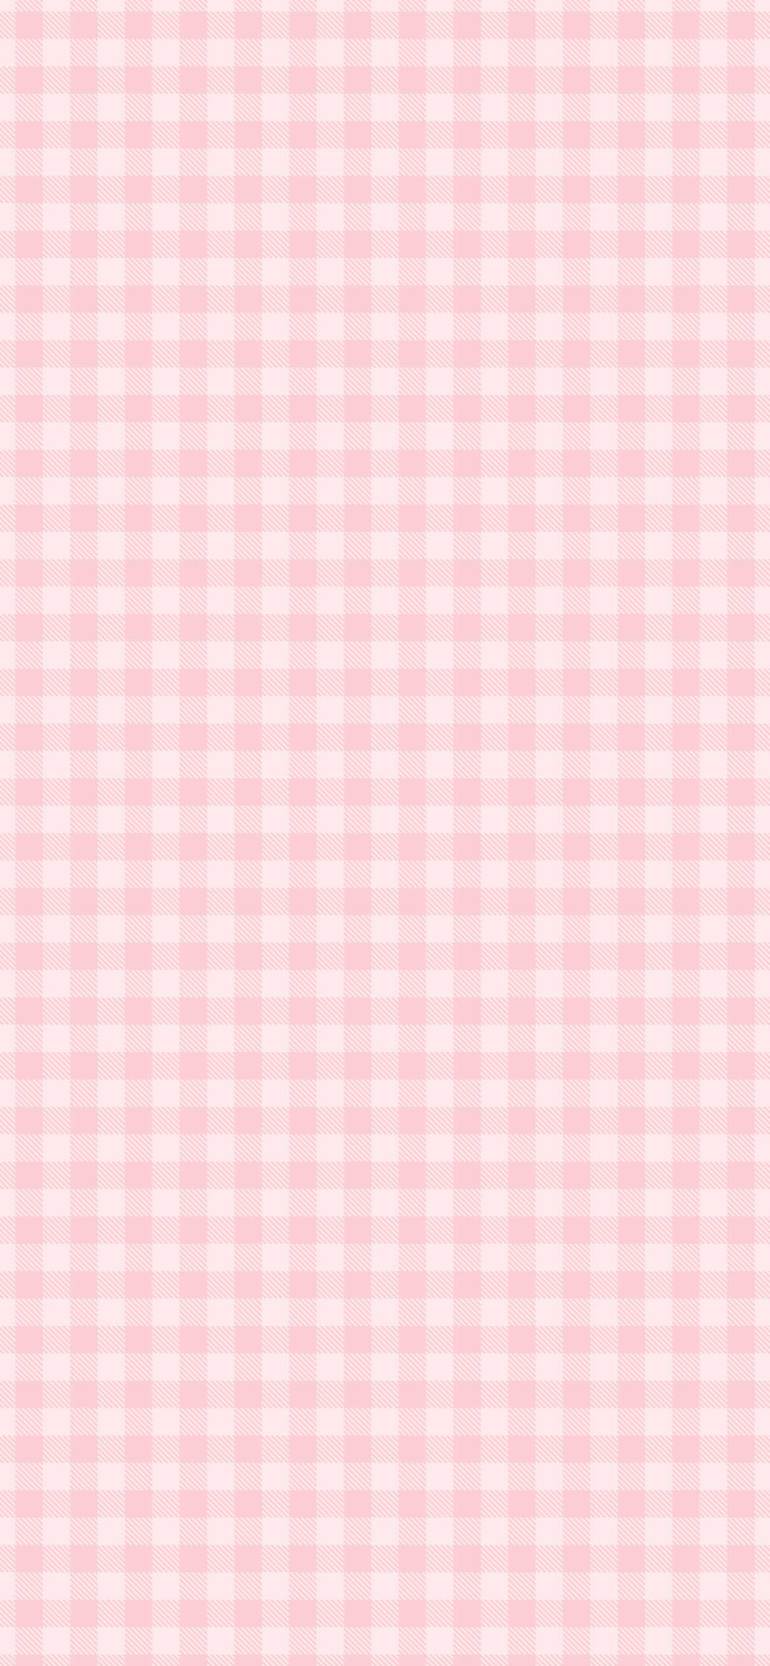 Pink Aesthetic Picture, Light Pink Plaid Wallpaper